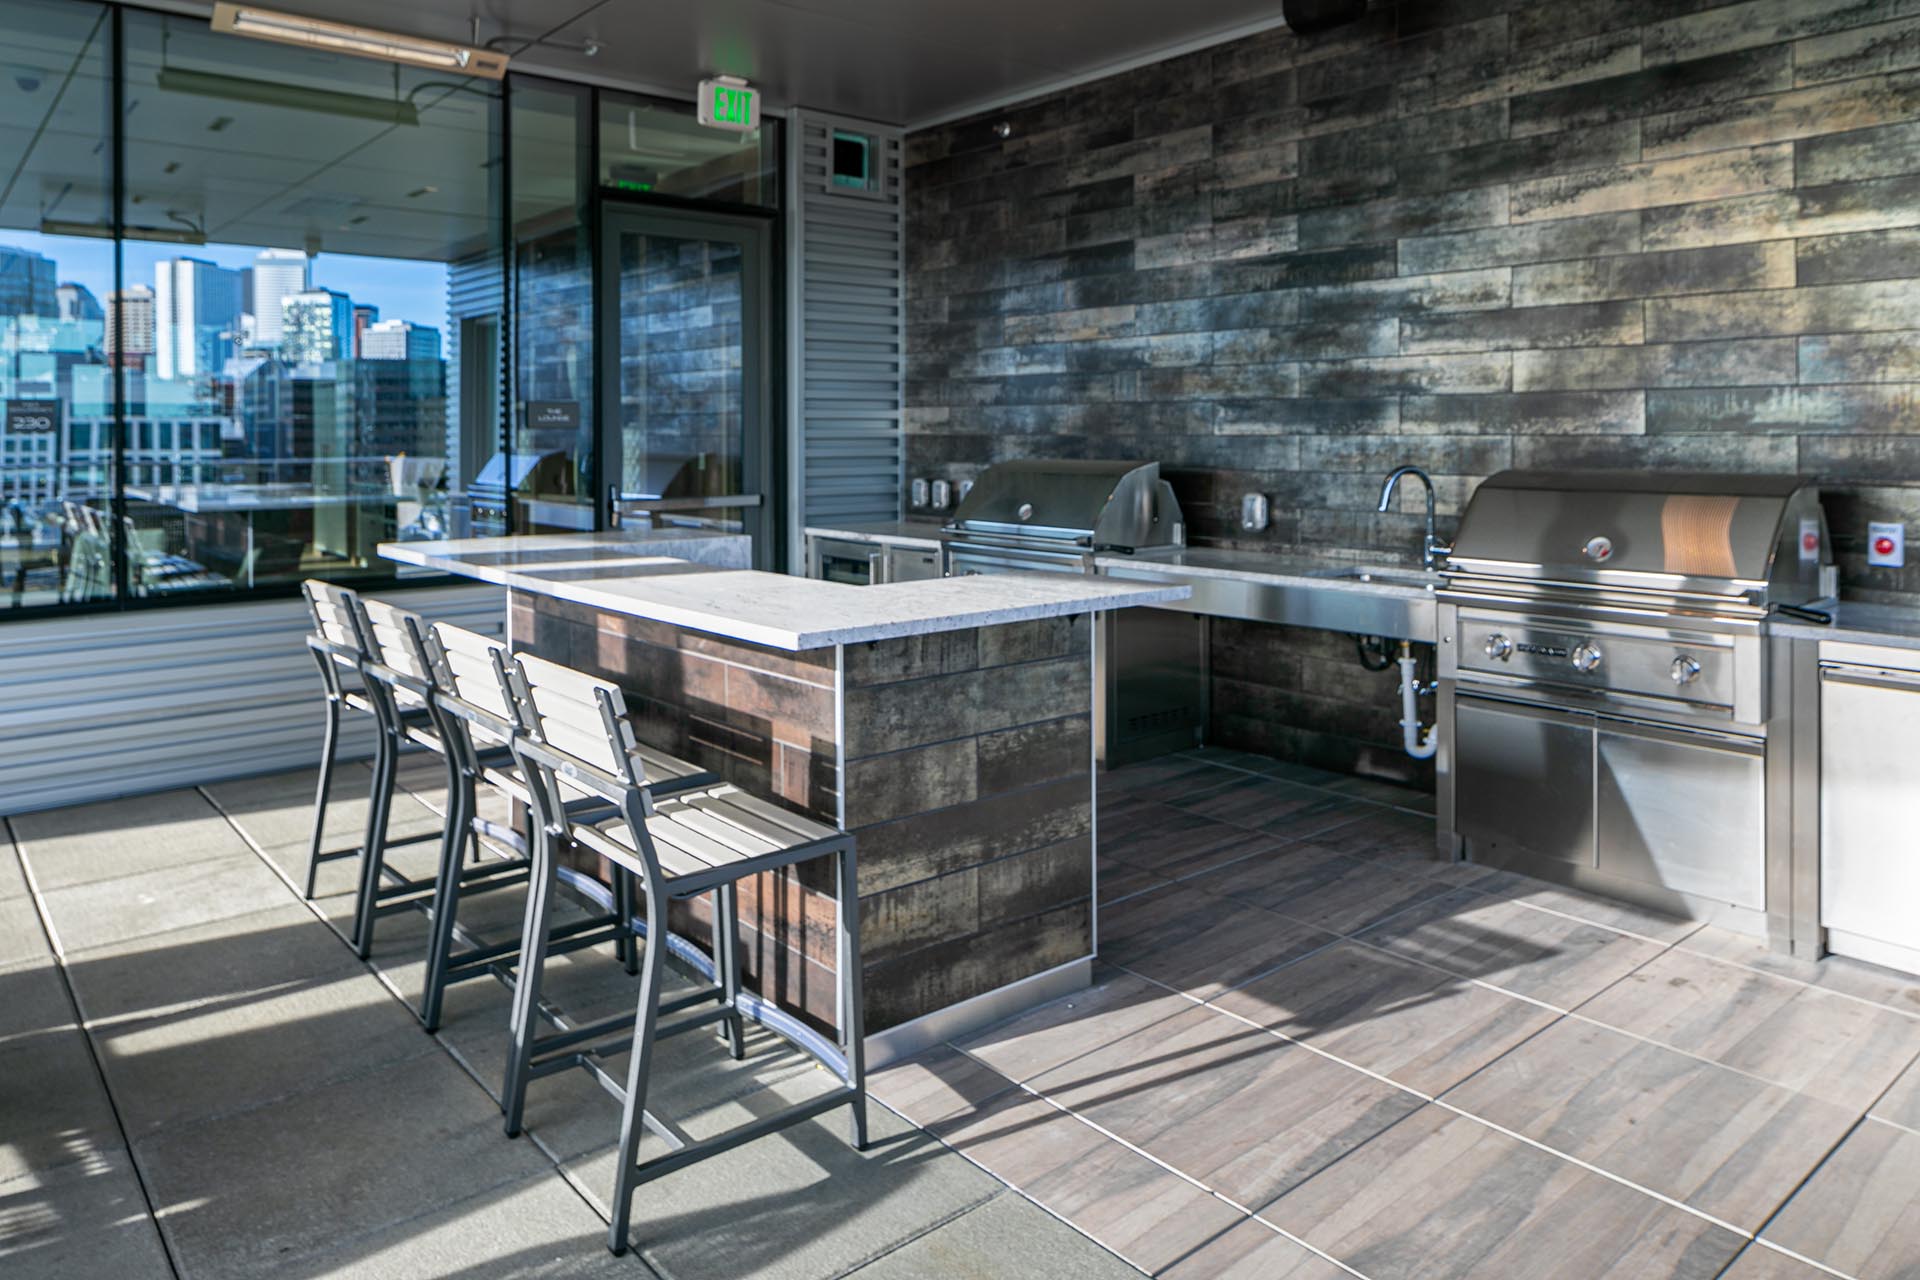 Outdoor deck seating with cooking area including sink and grills